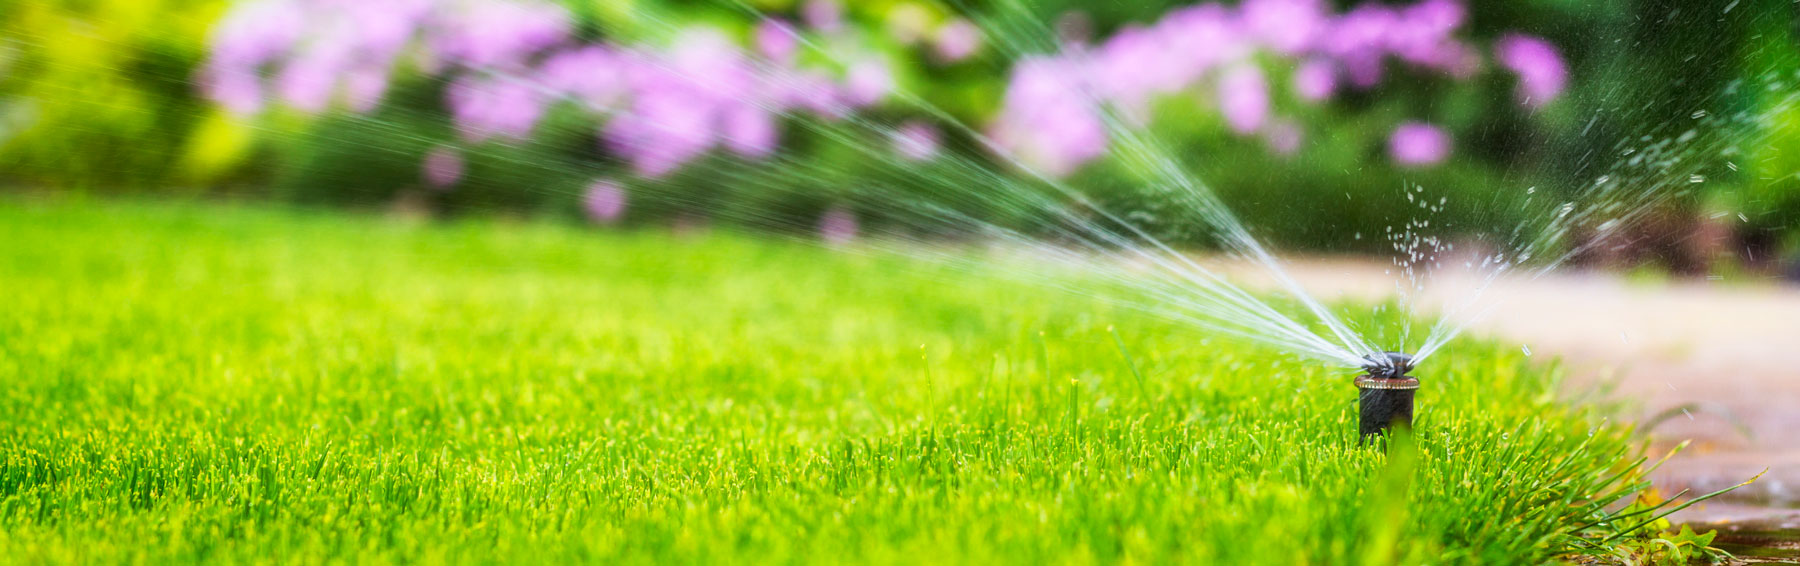 Find Irrigation Systems Near Me In Tulsa | The Living ...